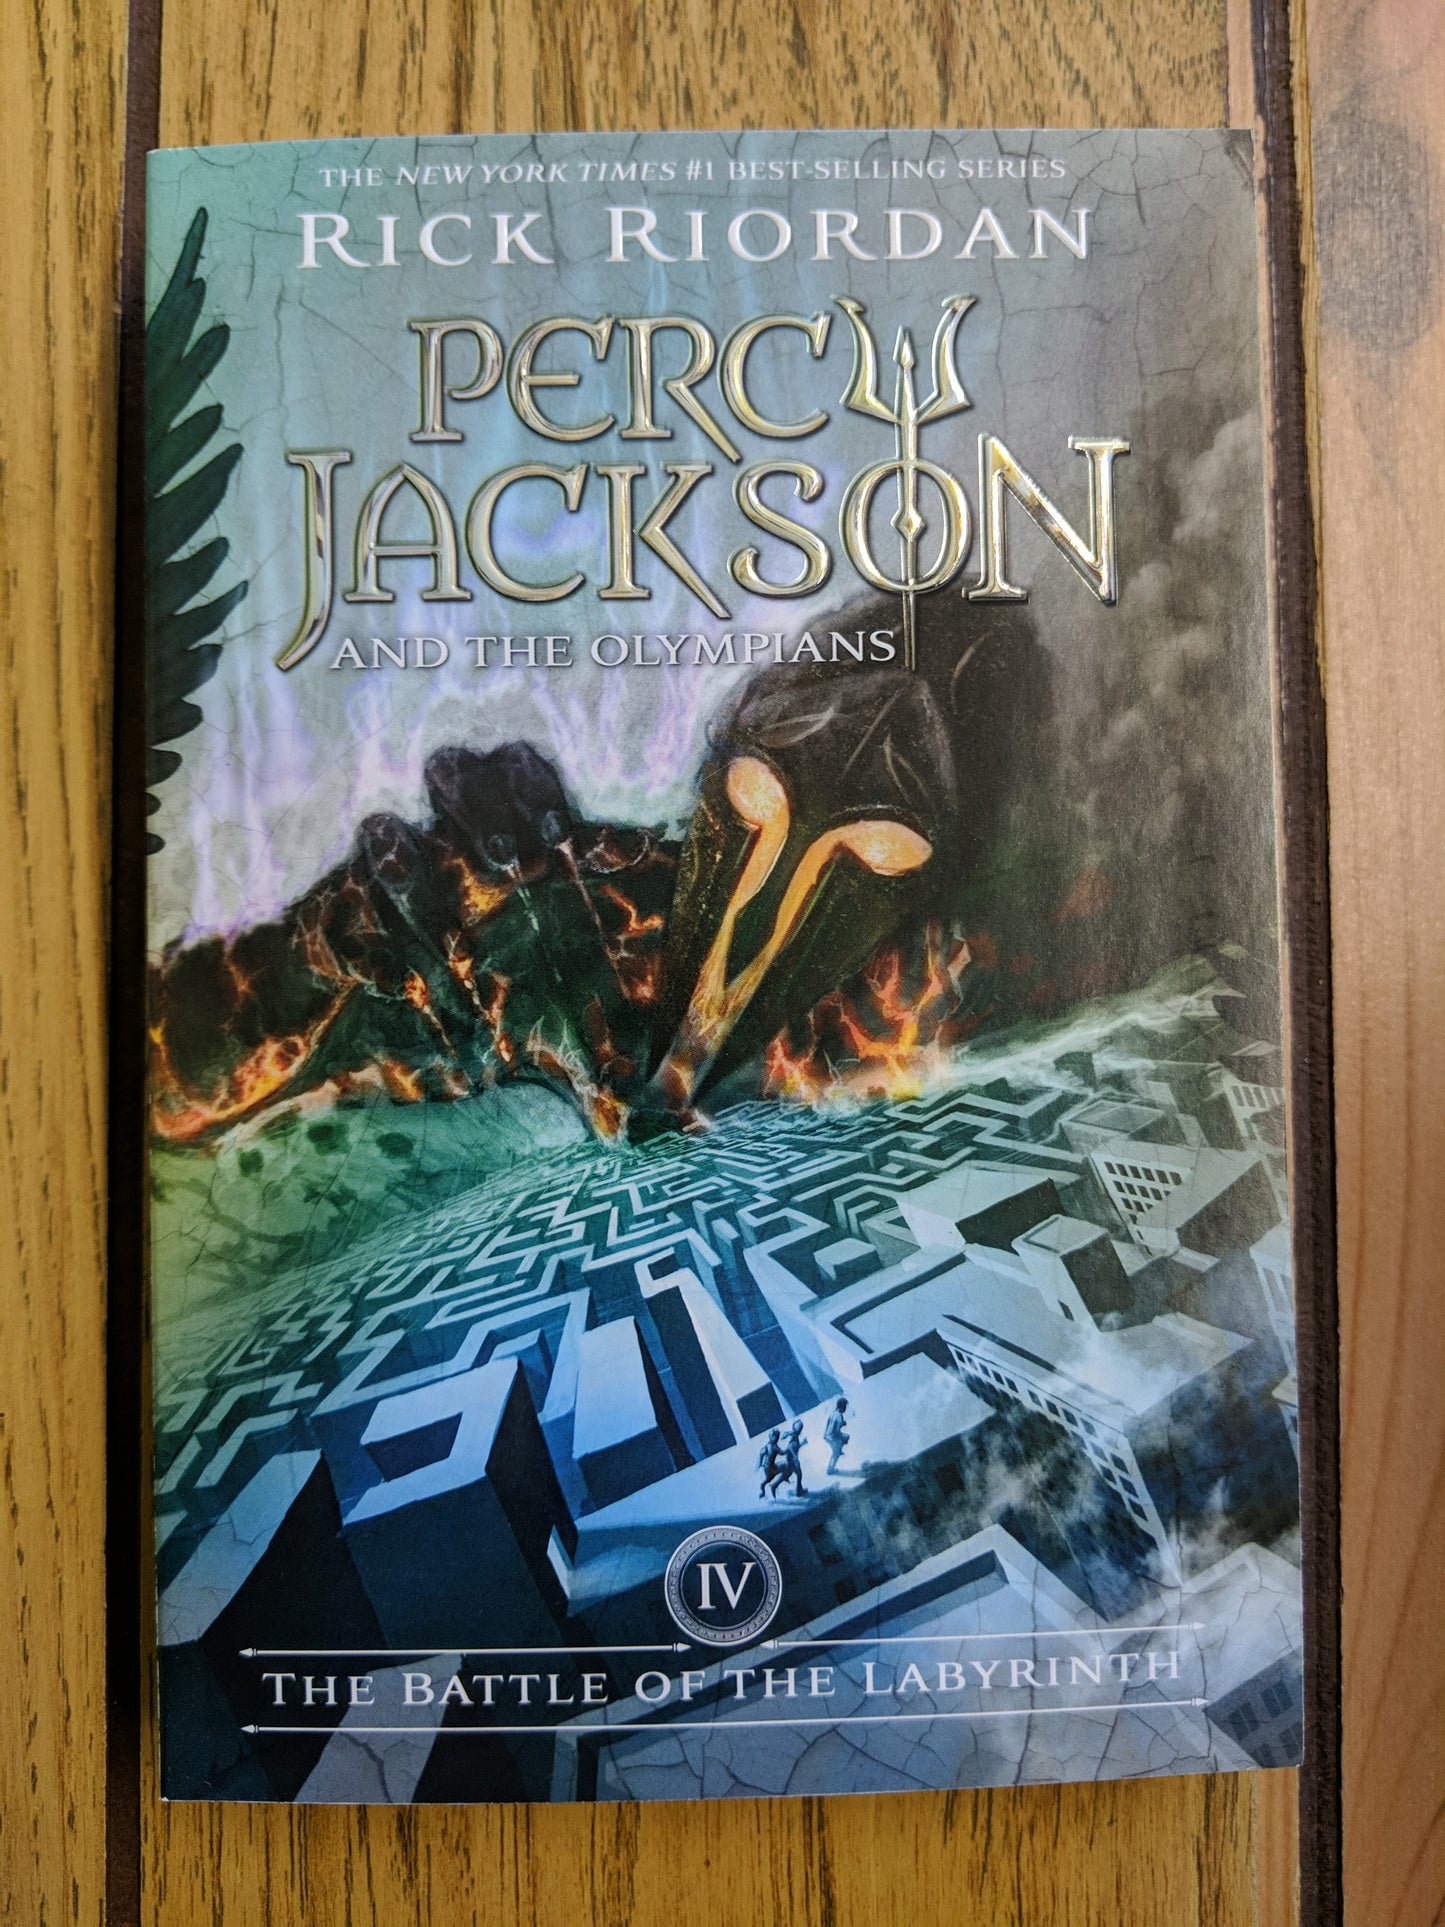 Percy Jackson and the Olympians: The Battle of the Labyrinth (#4)